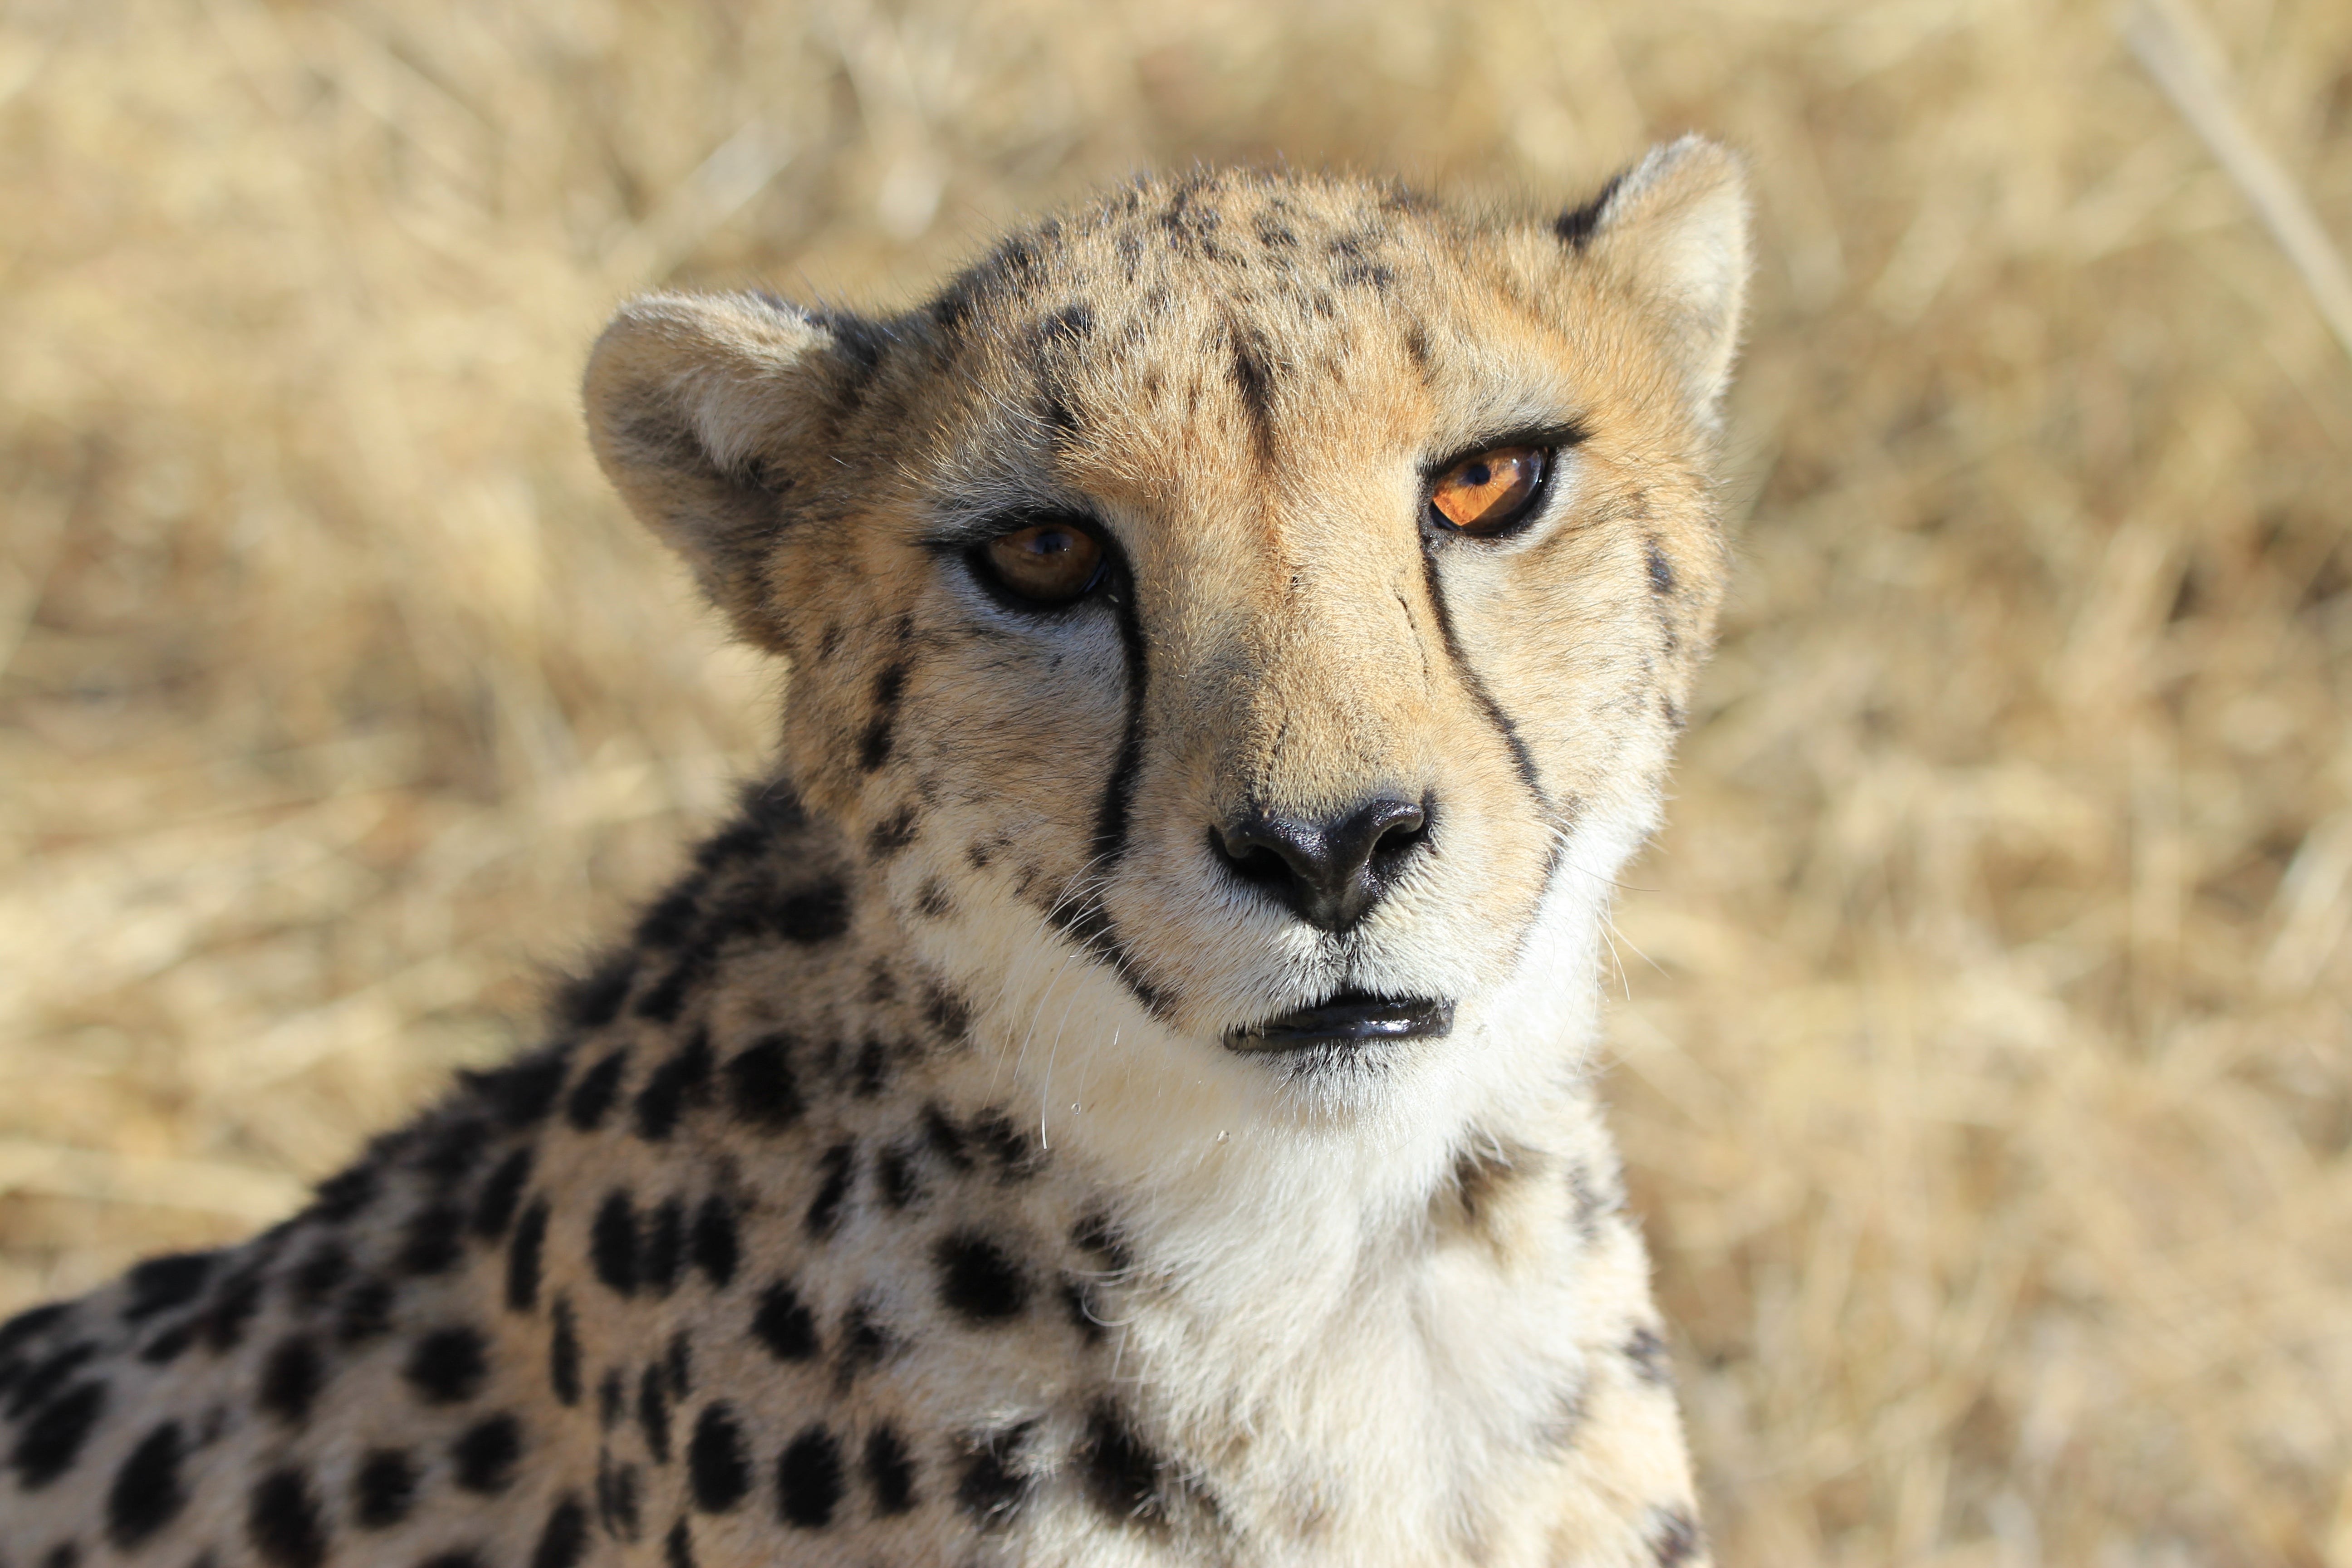 One of the five female cheetahs India relocated from Namibia last year